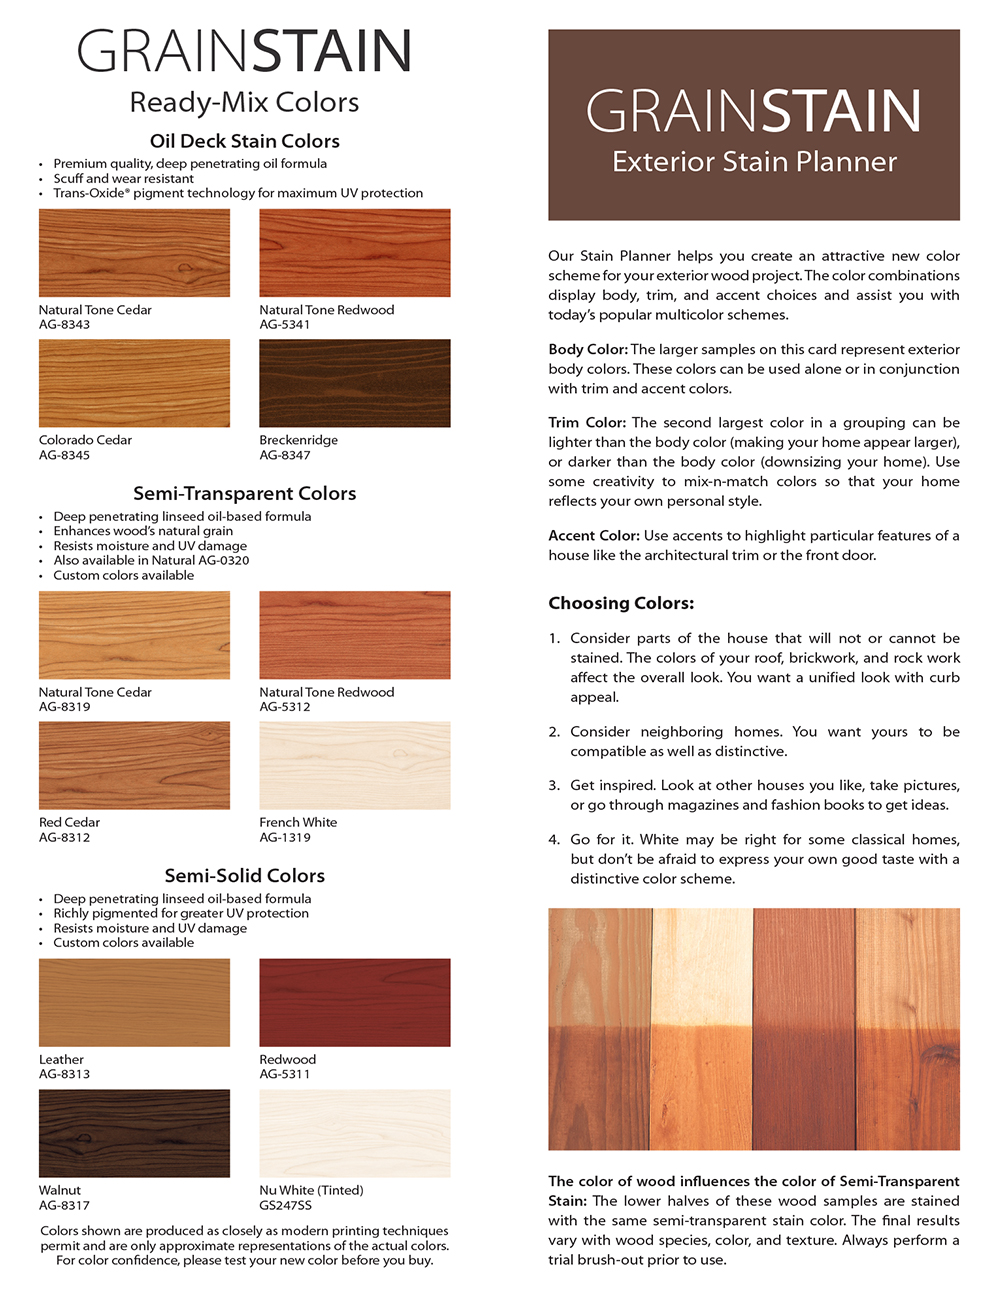 Exterior Stain Planner - Page 04